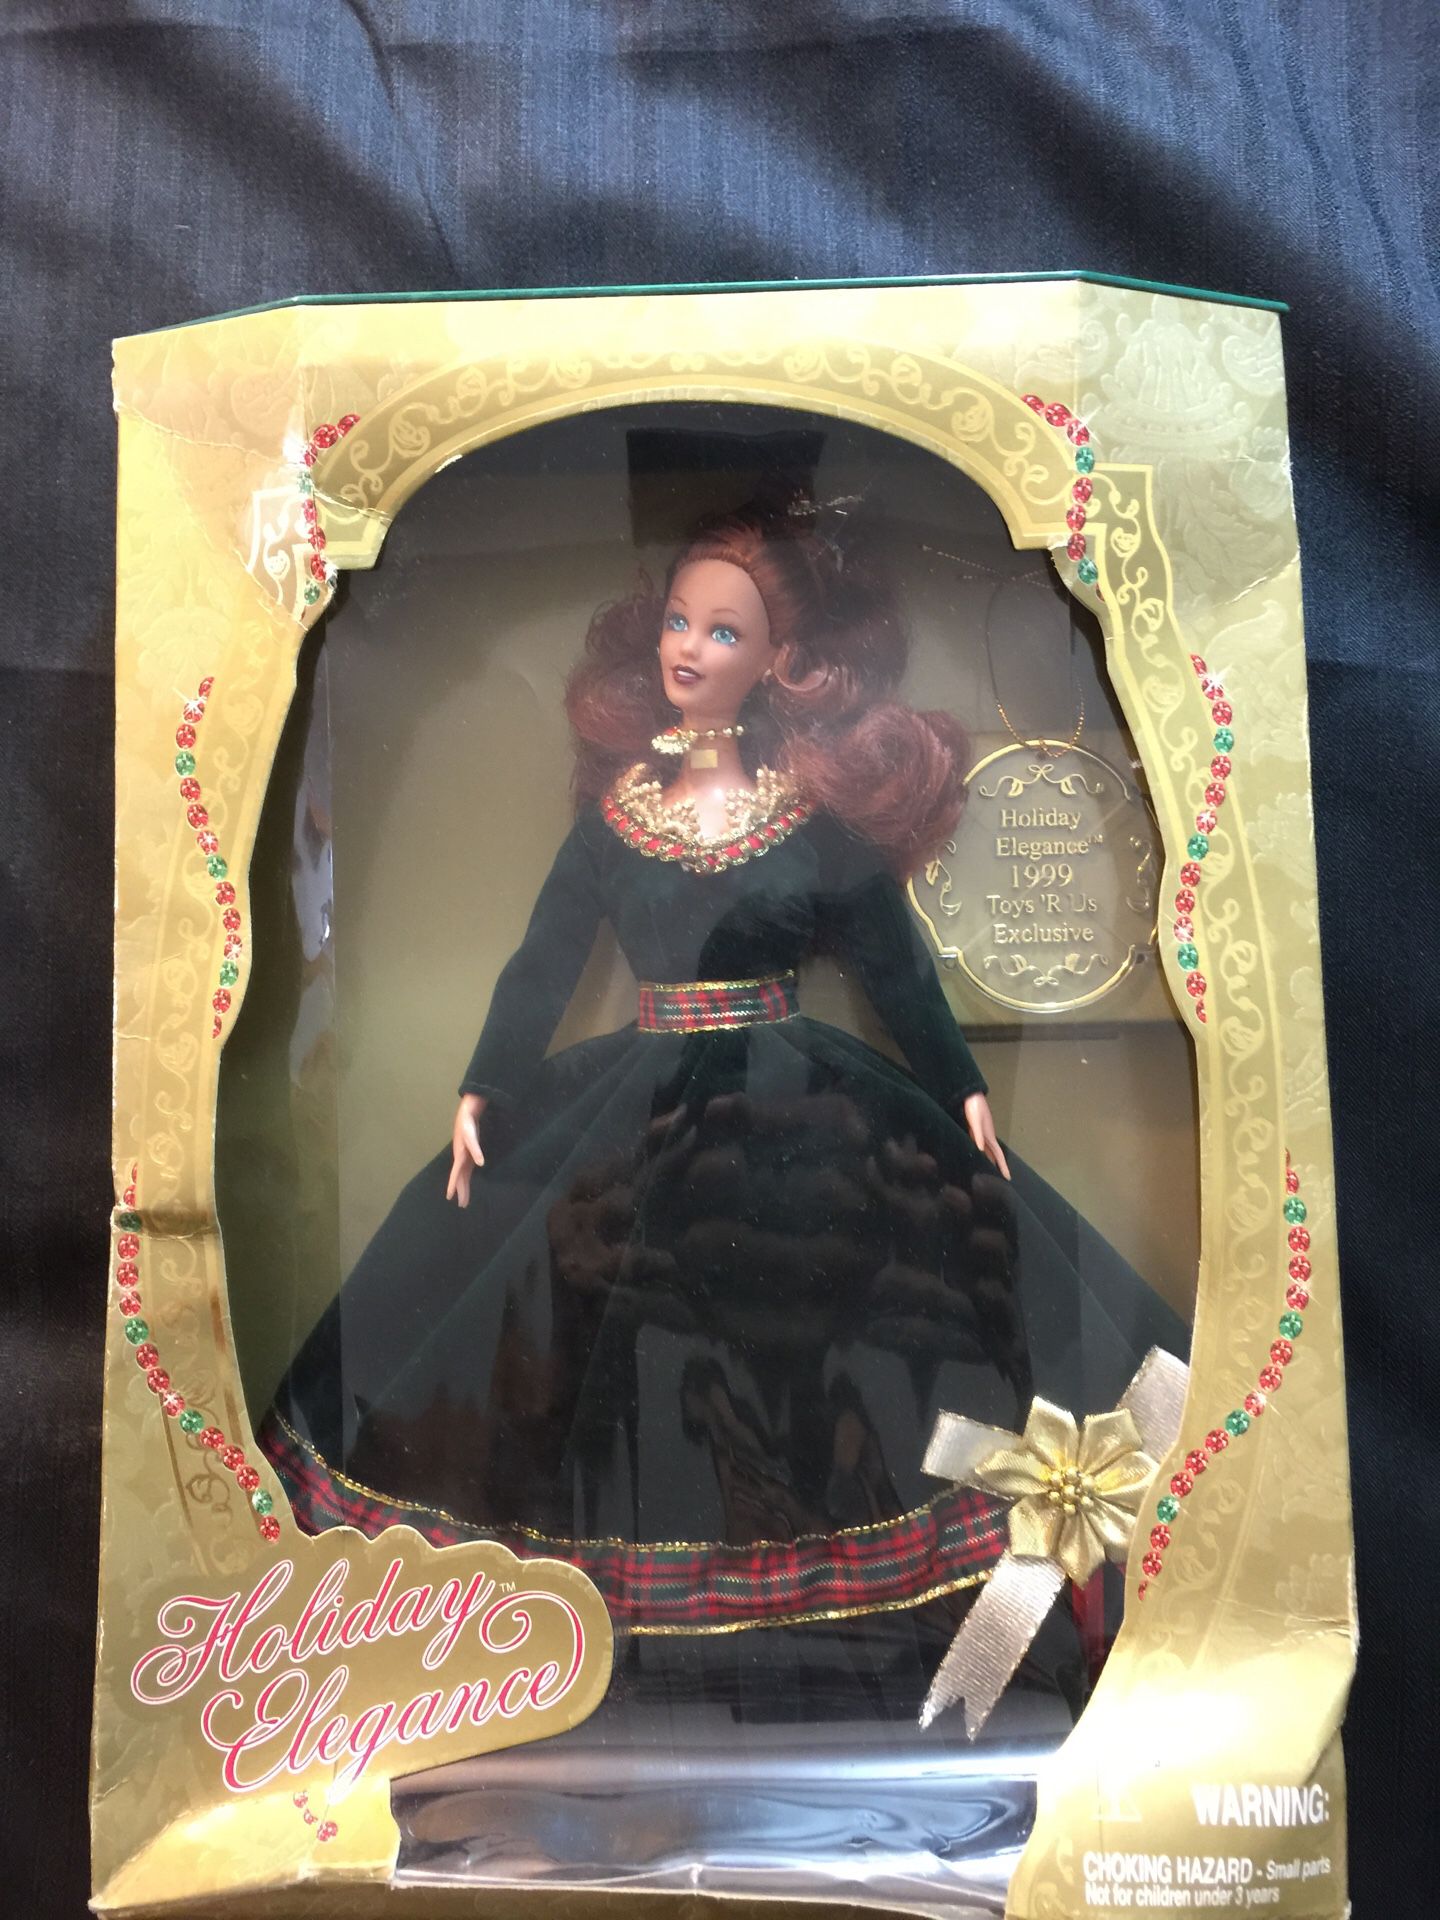 Holiday Elegance 1999 Toys R us Exclusive Barbie